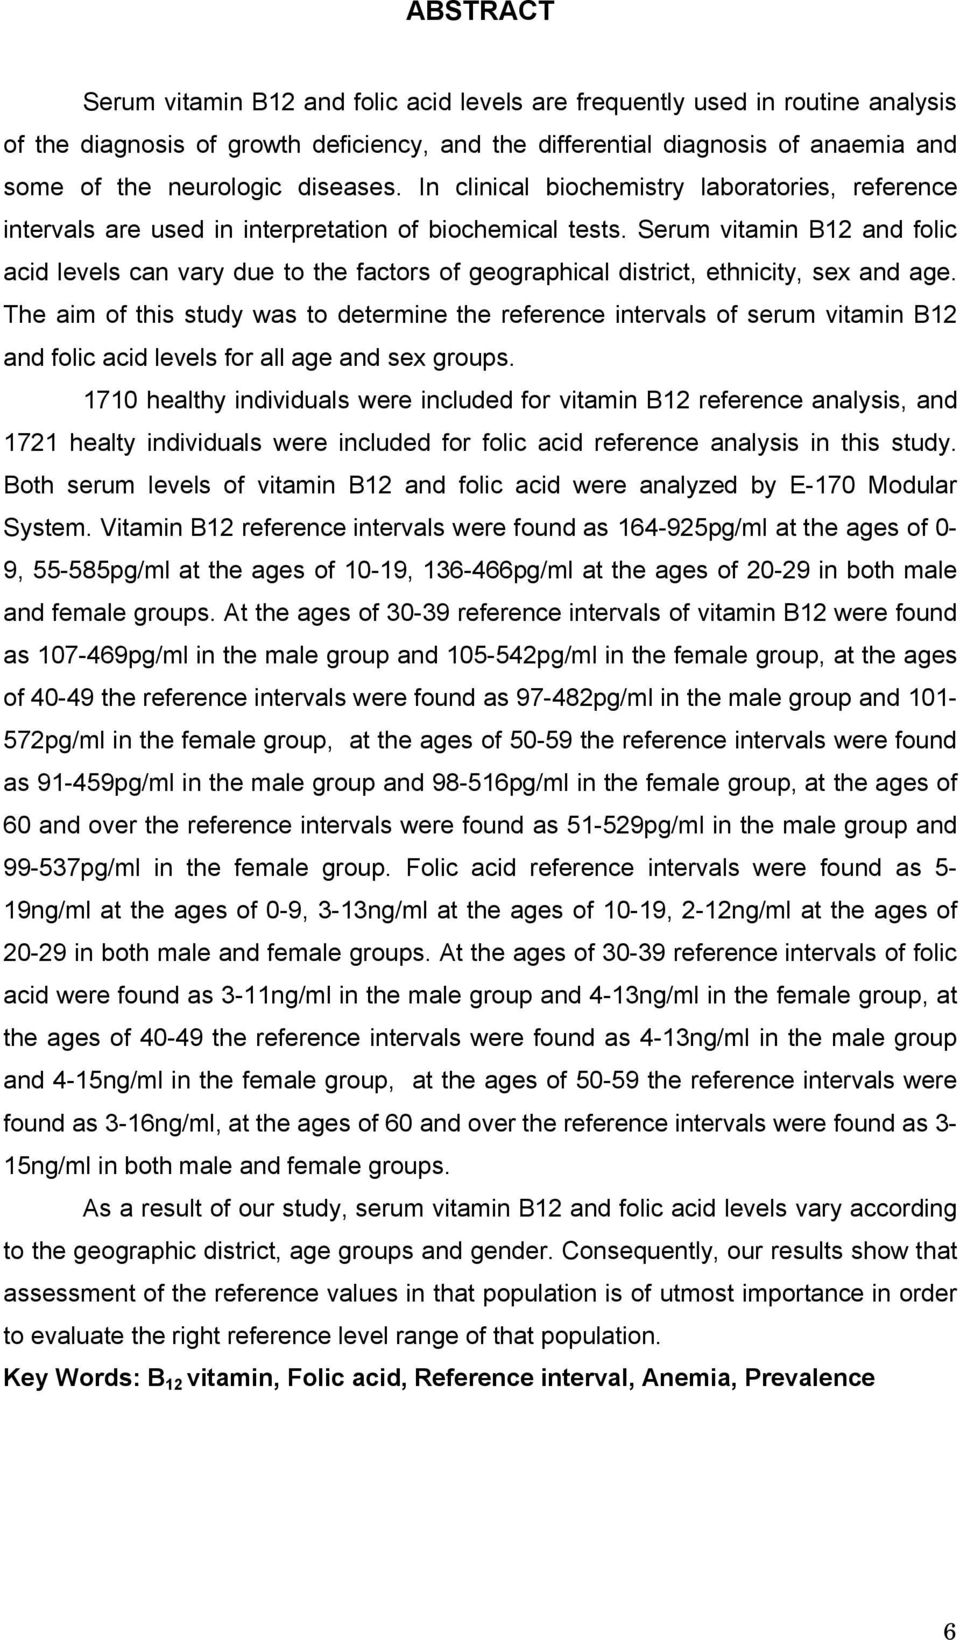 Serum vitamin B12 and folic acid levels can vary due to the factors of geographical district, ethnicity, sex and age.